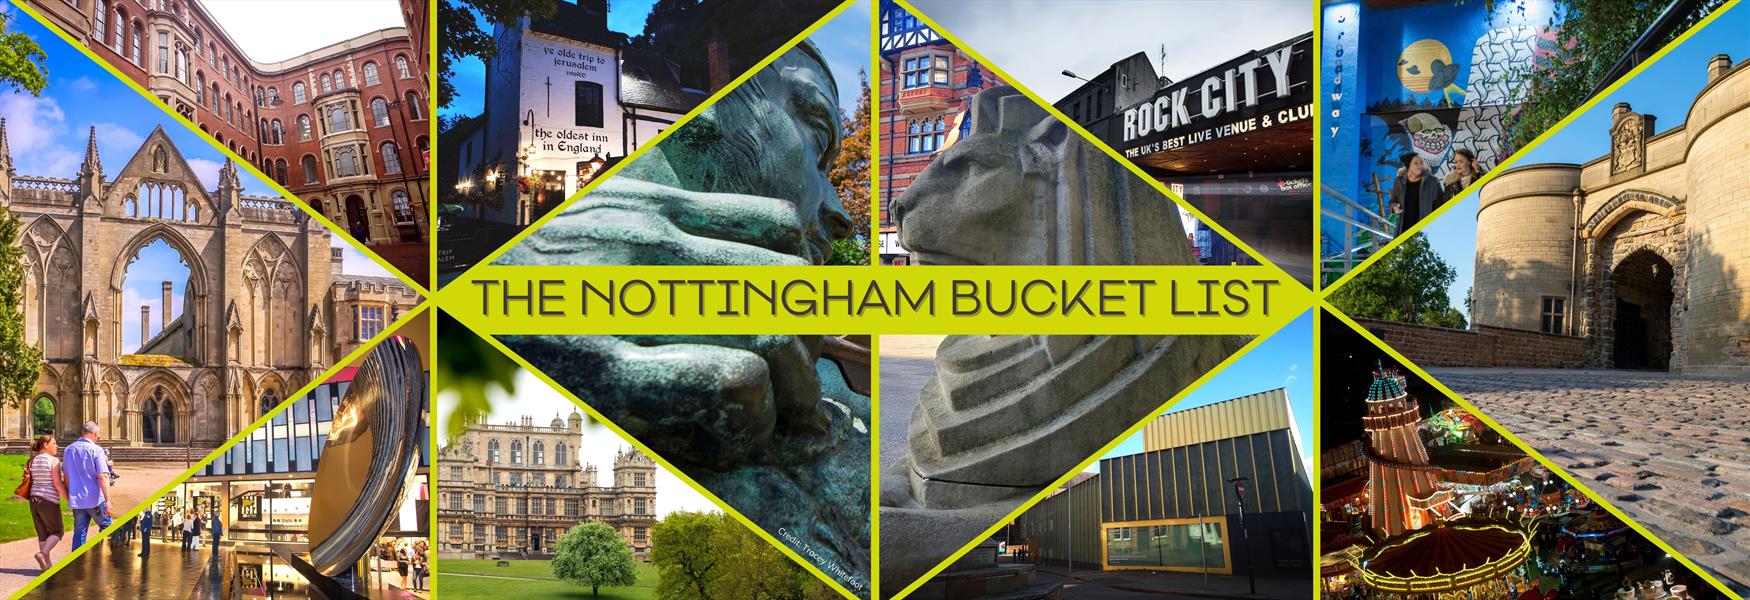 places to visit outside nottingham